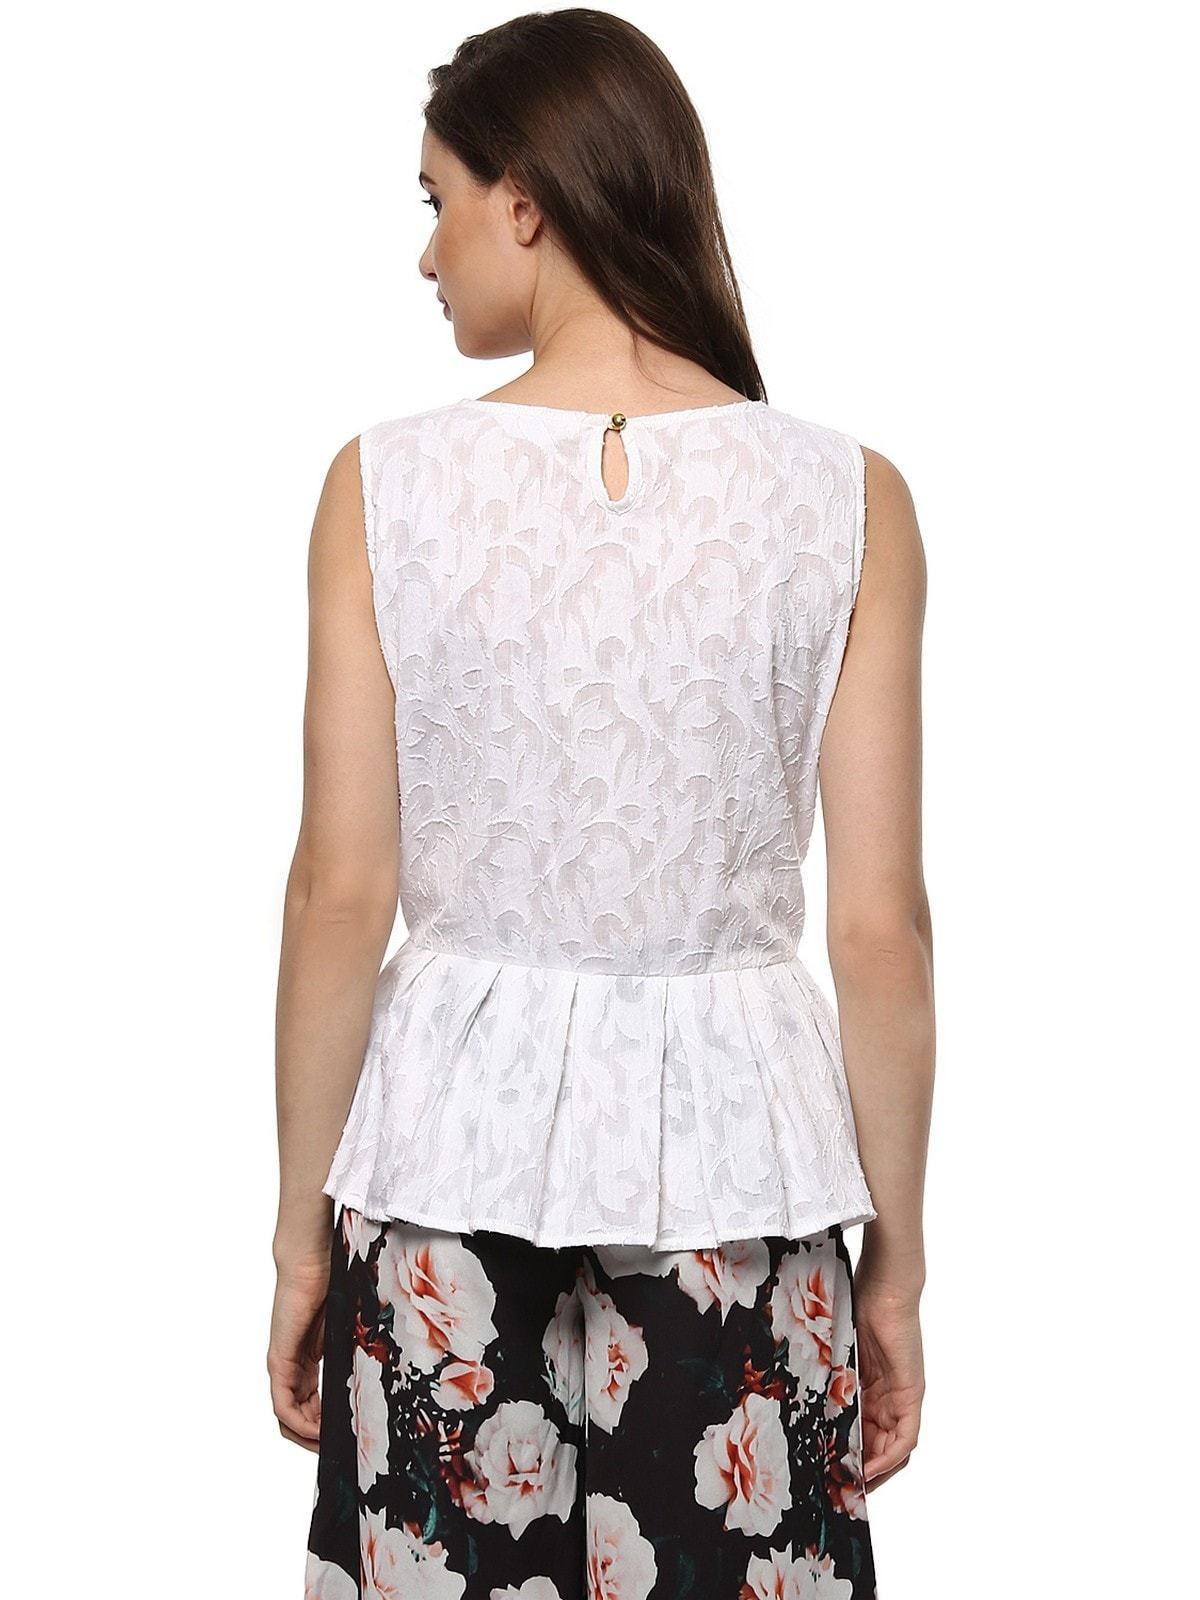 Women's Self Embroidered Sleeveless Top - Pannkh